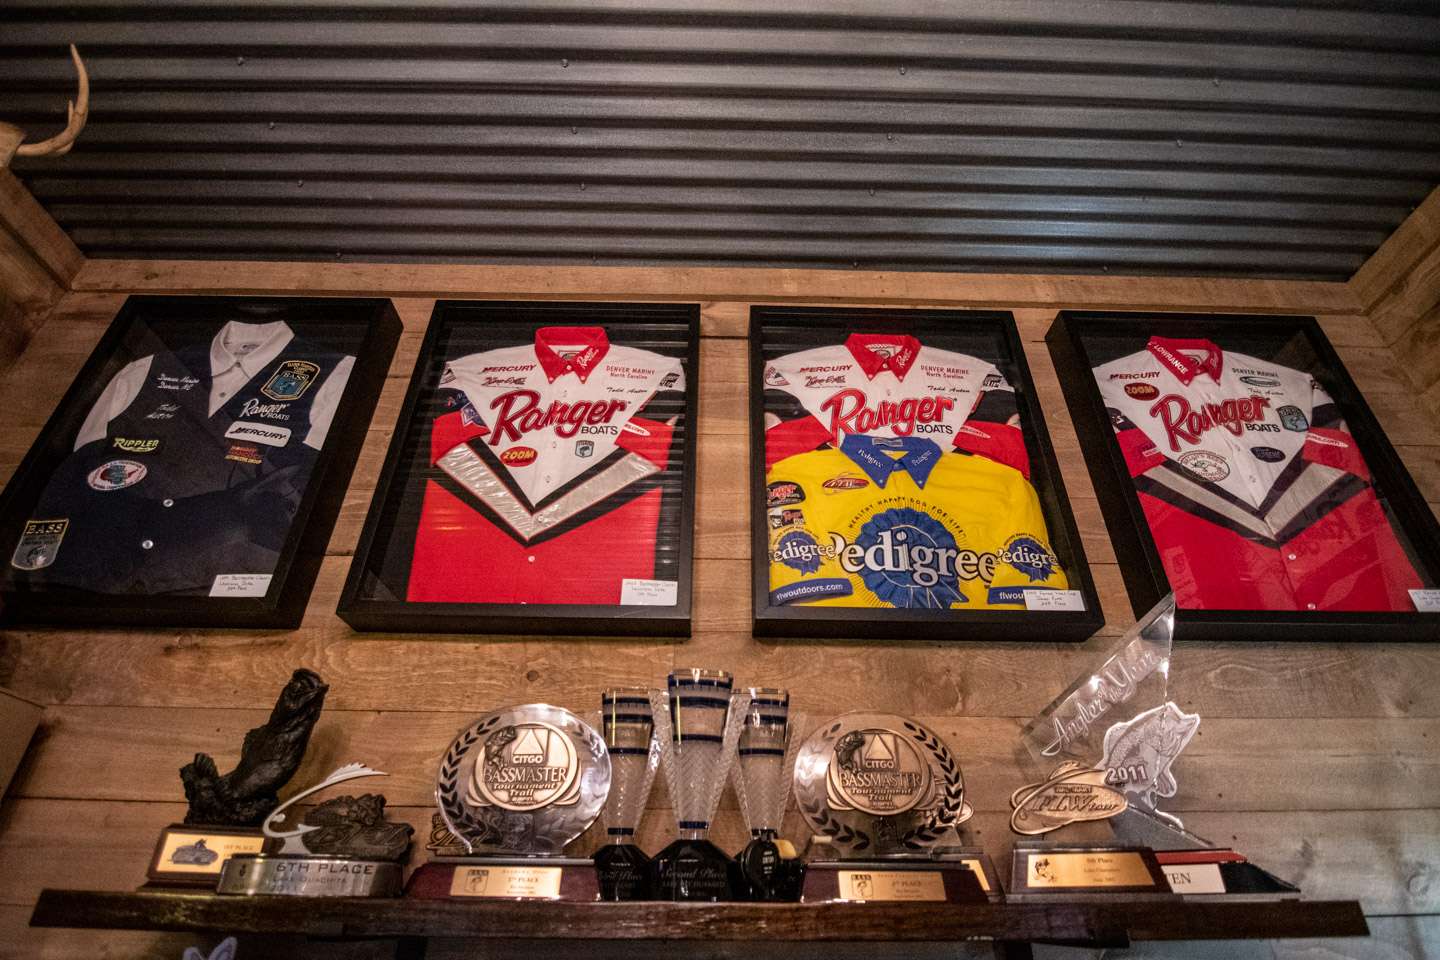 Along the top of the wall are Auten’s framed jerseys from various fishing championships, beginning with his 1999 Classic jersey.   